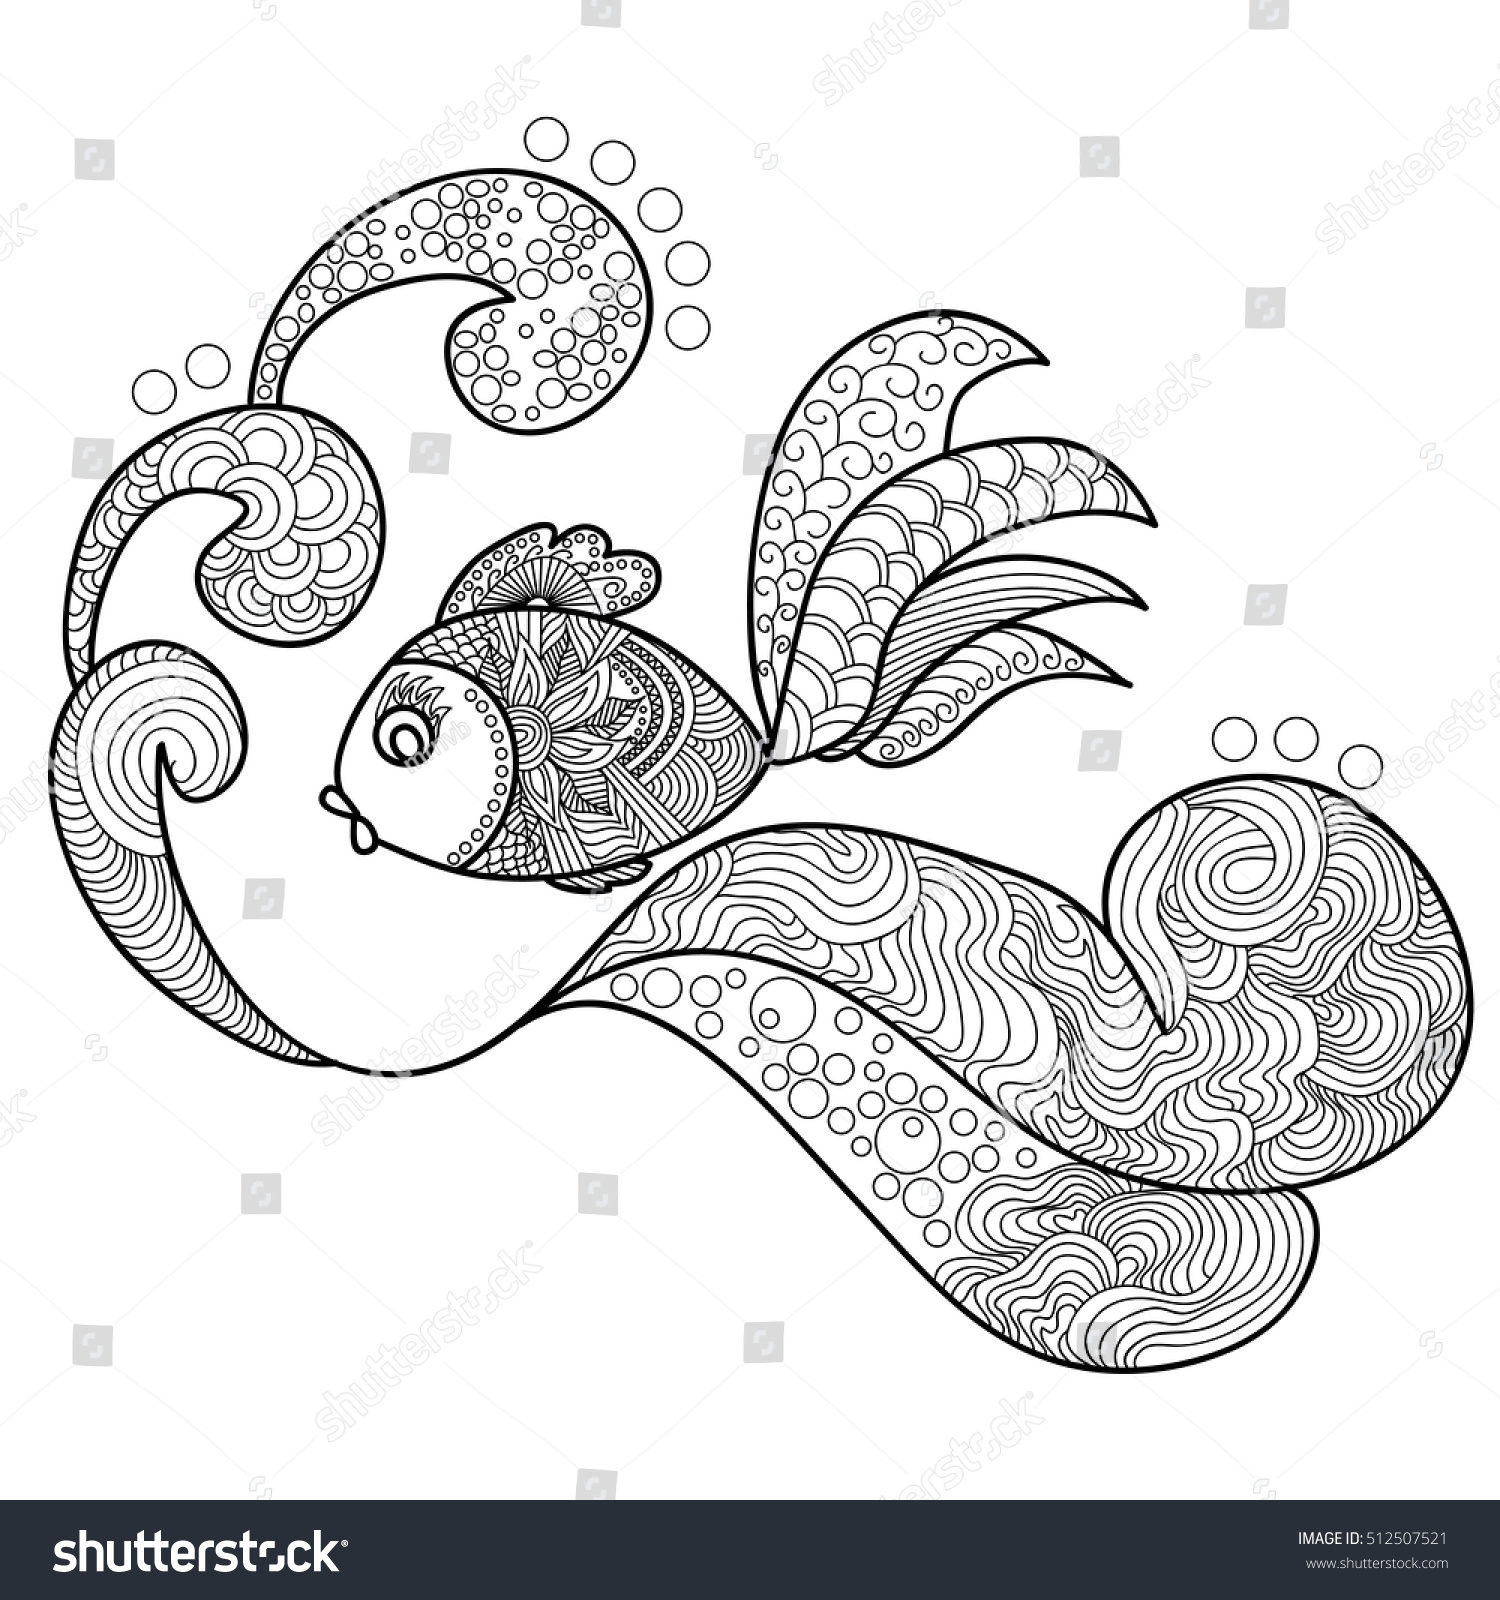 Fish Swimming Over Waves Doodles Art Printing Stock Vector Royalty